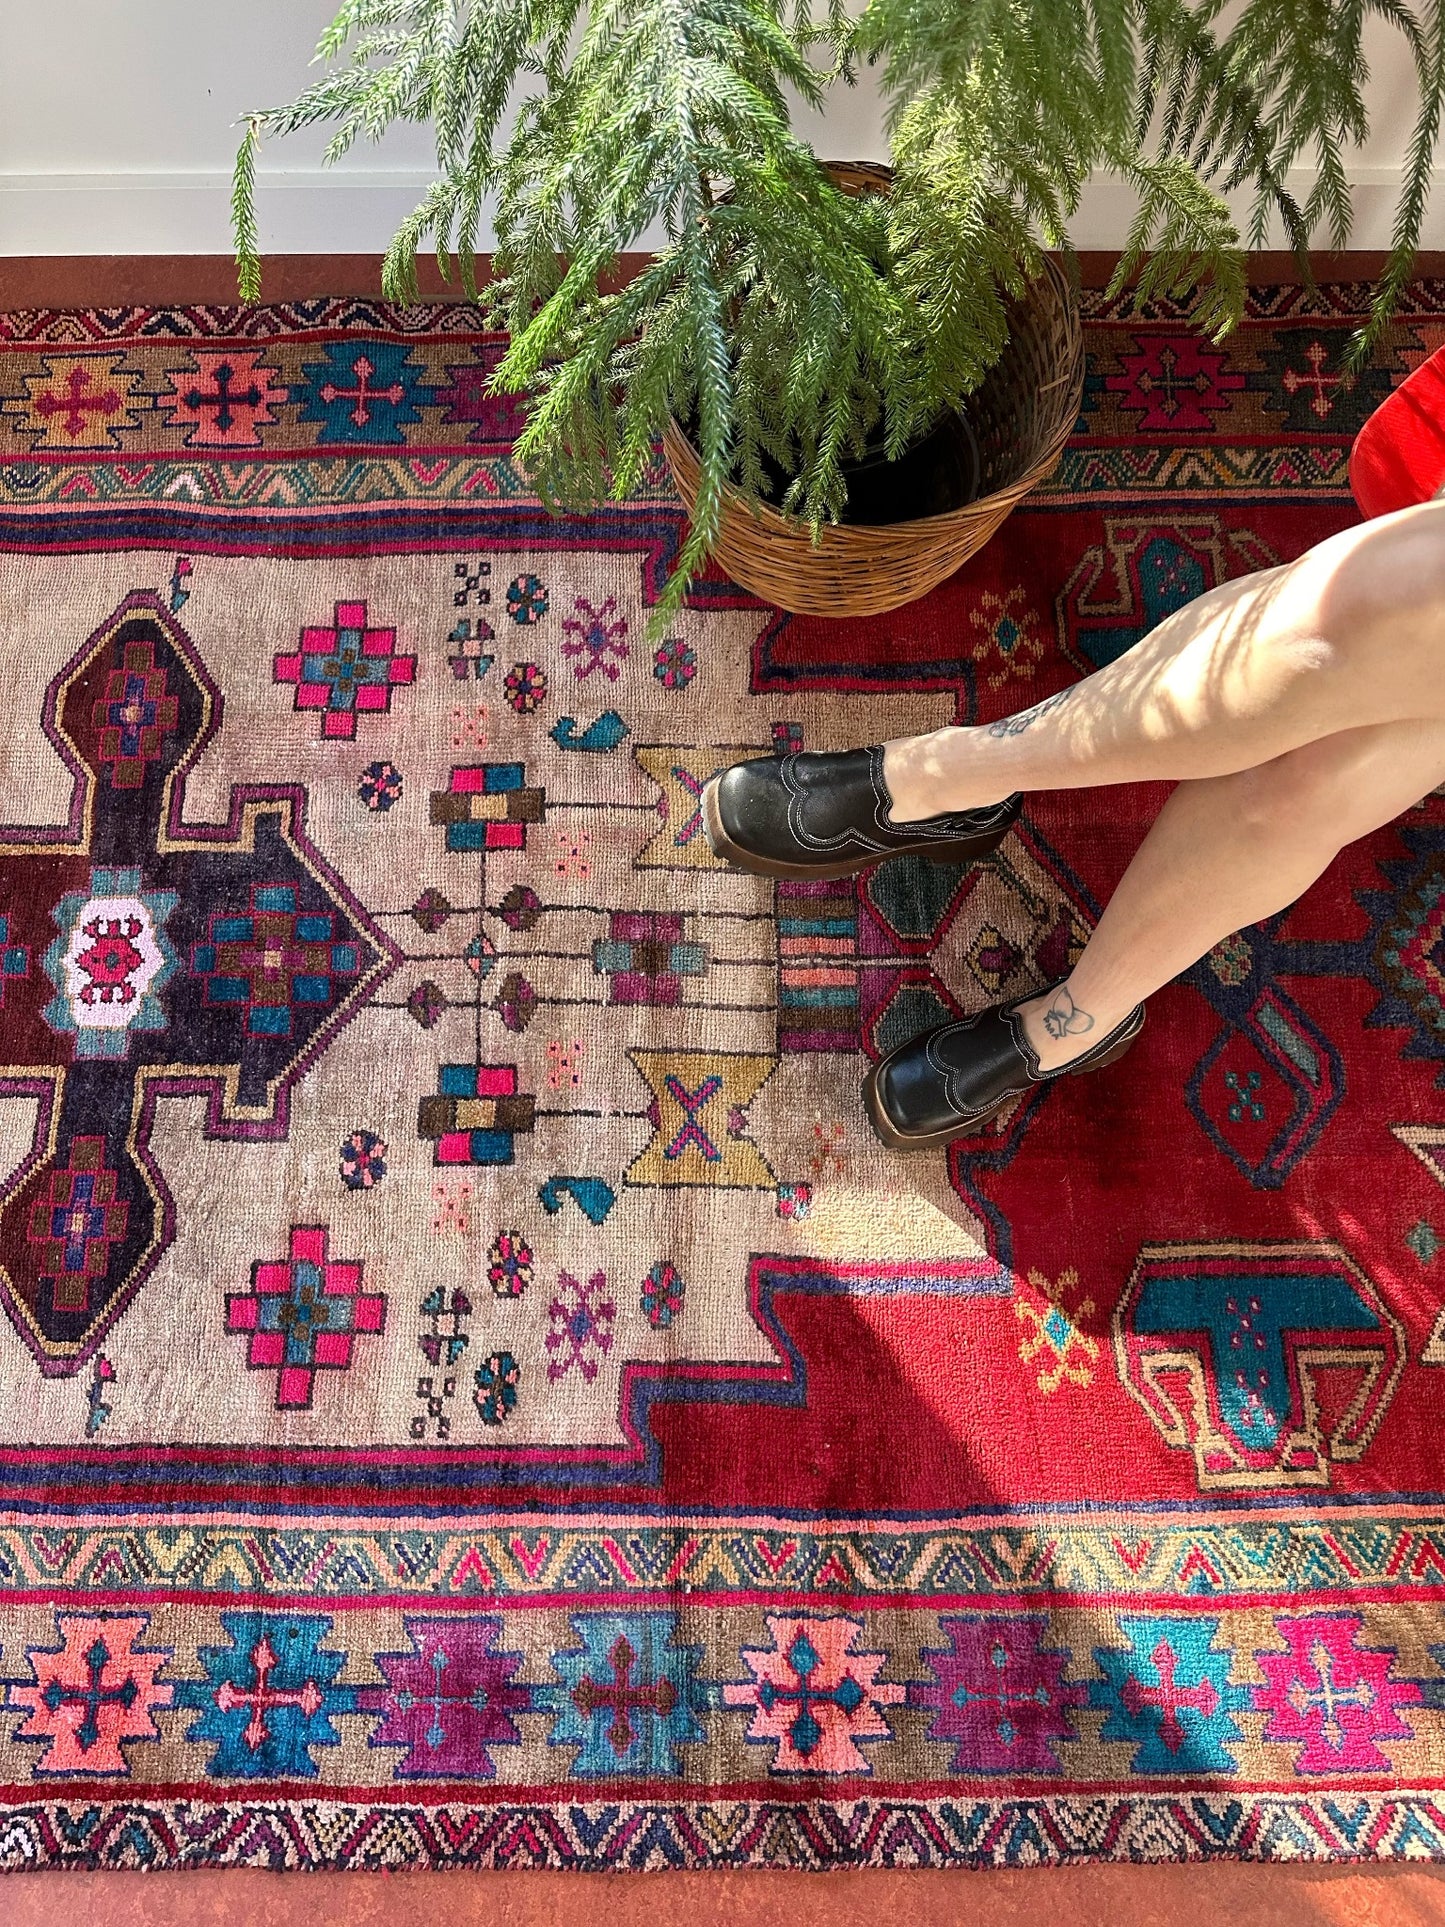 See Details of Cape Persian Rug from Overhead